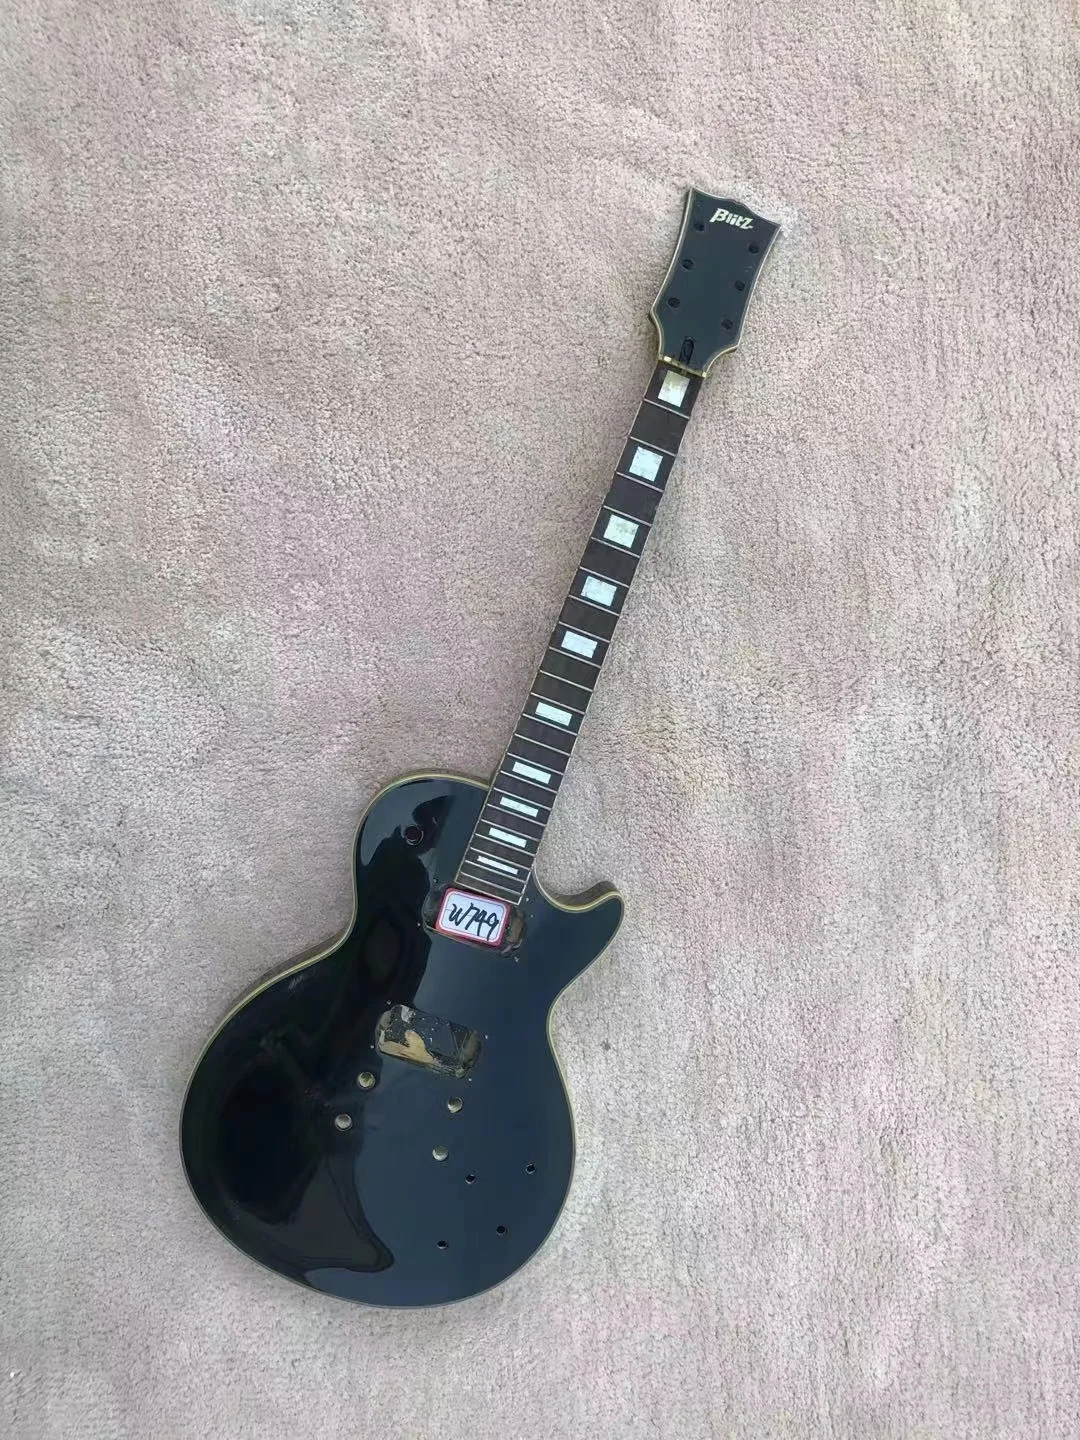 DIY (Not New) Custom Electric Guitar Black Beauty without Hardwares in Stock Discount Free Shipping W749